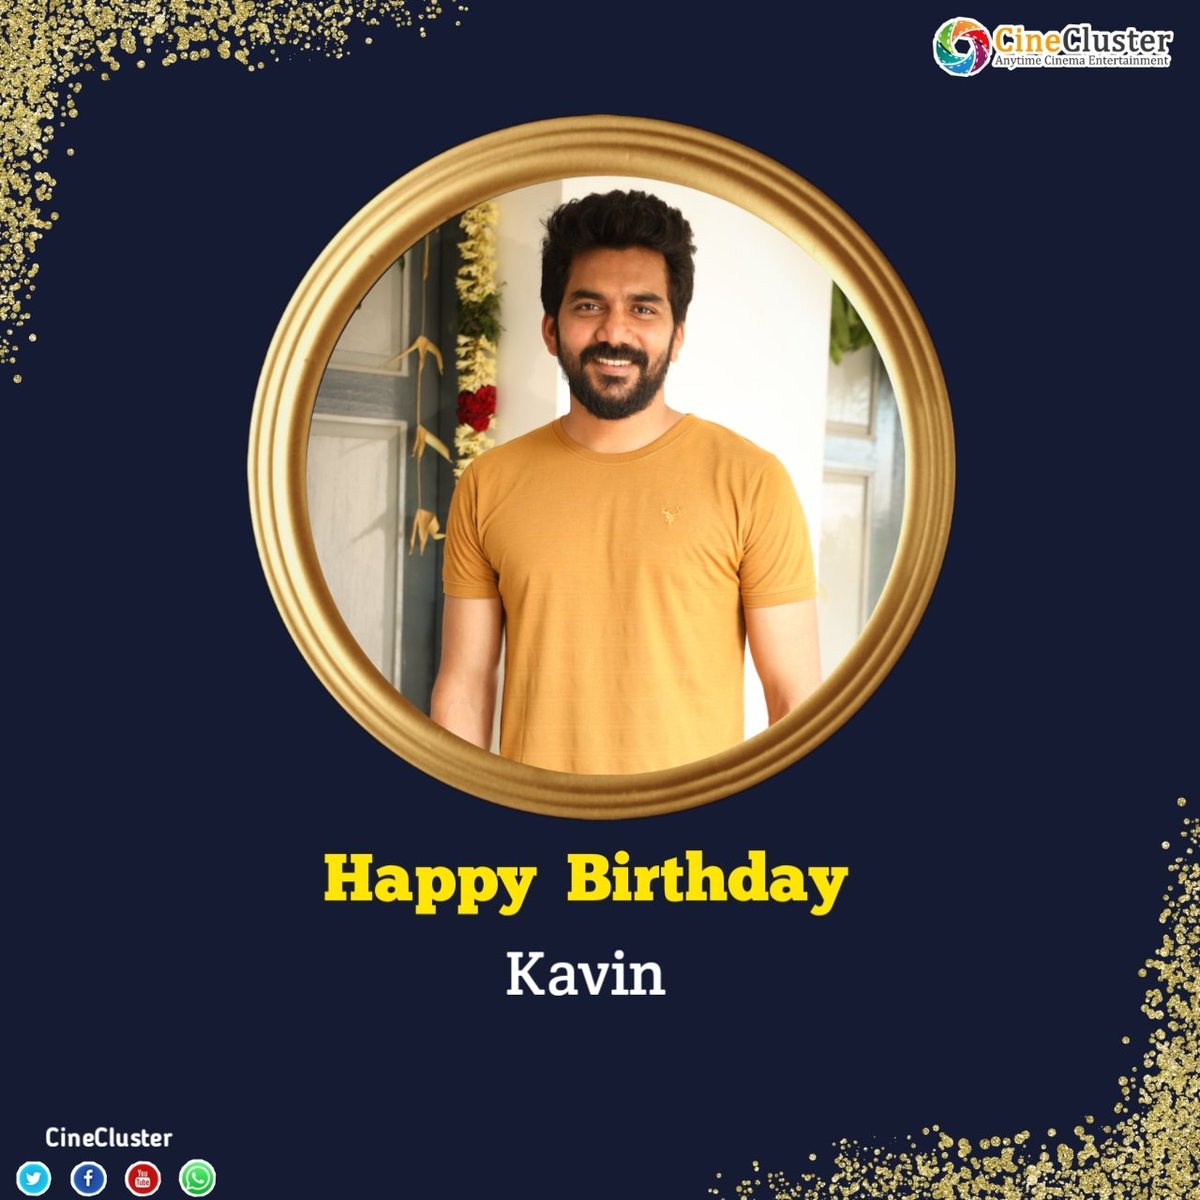 Team #CineCluster Wishing you a very Happy Birthday!!! 
 Have a great & healthy year ahead #Kavin

#HBDKavin